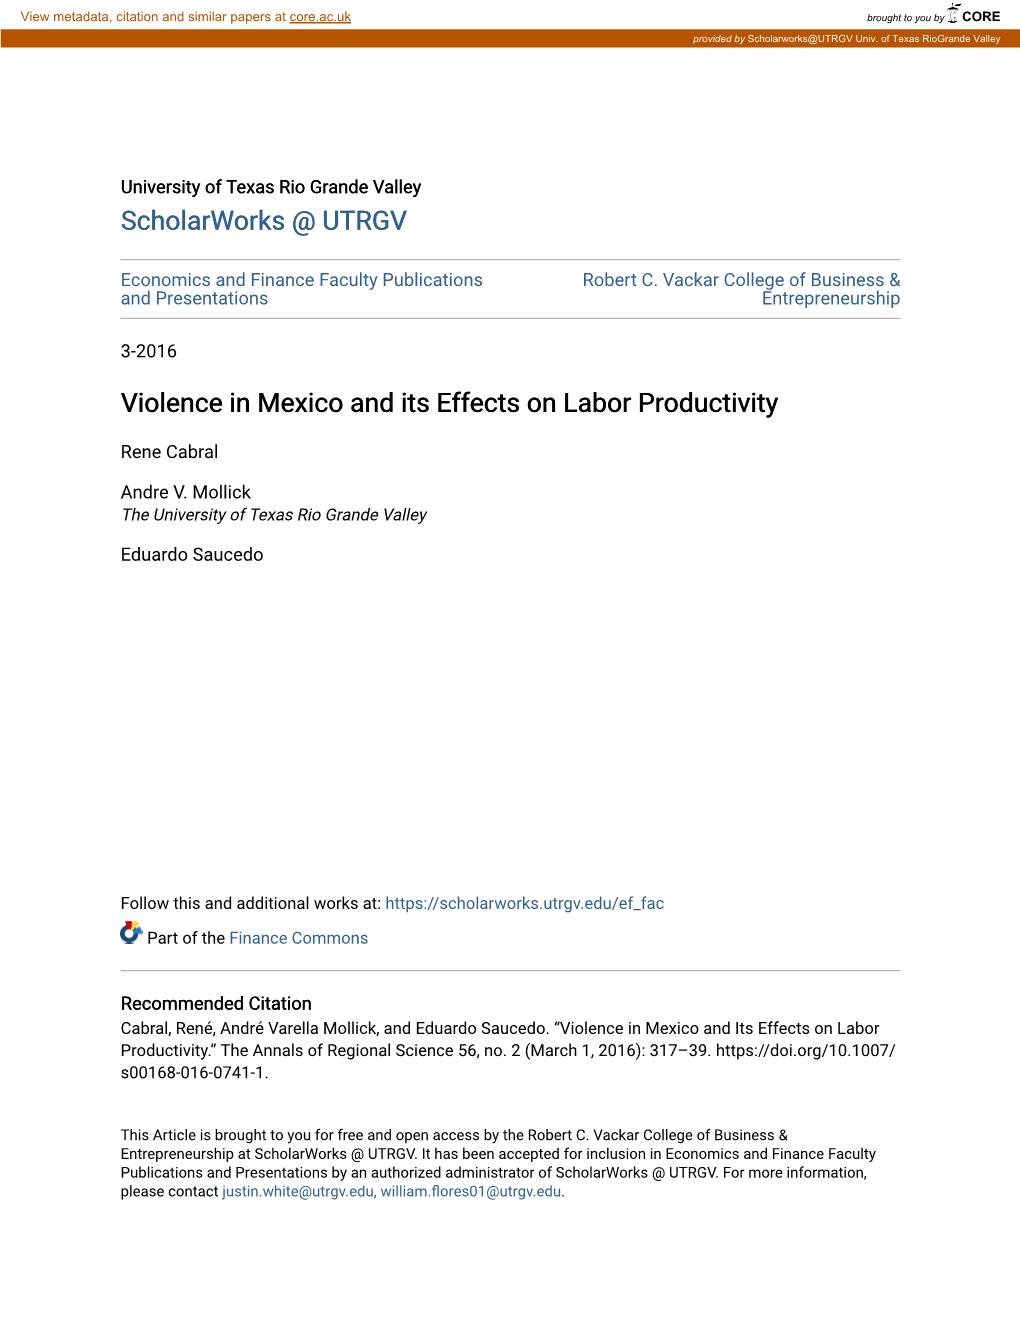 Violence in Mexico and Its Effects on Labor Productivity